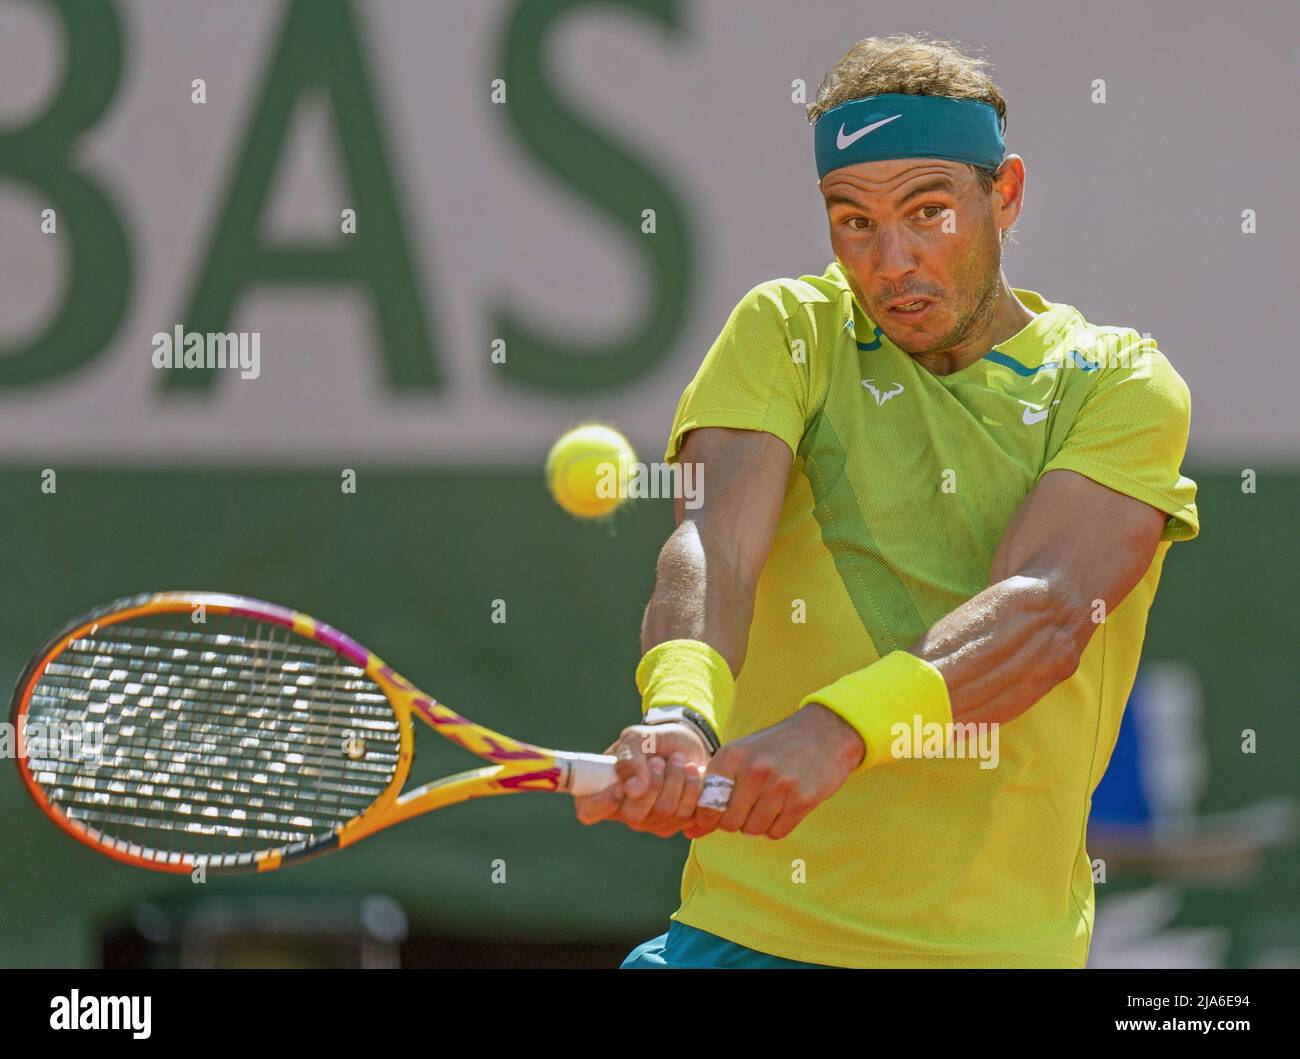 Paris, France. 27th May 2022. Spain's Rafael Nadal plays a shot against  Botic van de Zandschulp of the Netherlands in the third round of the French Open  tennis tournament in Paris on